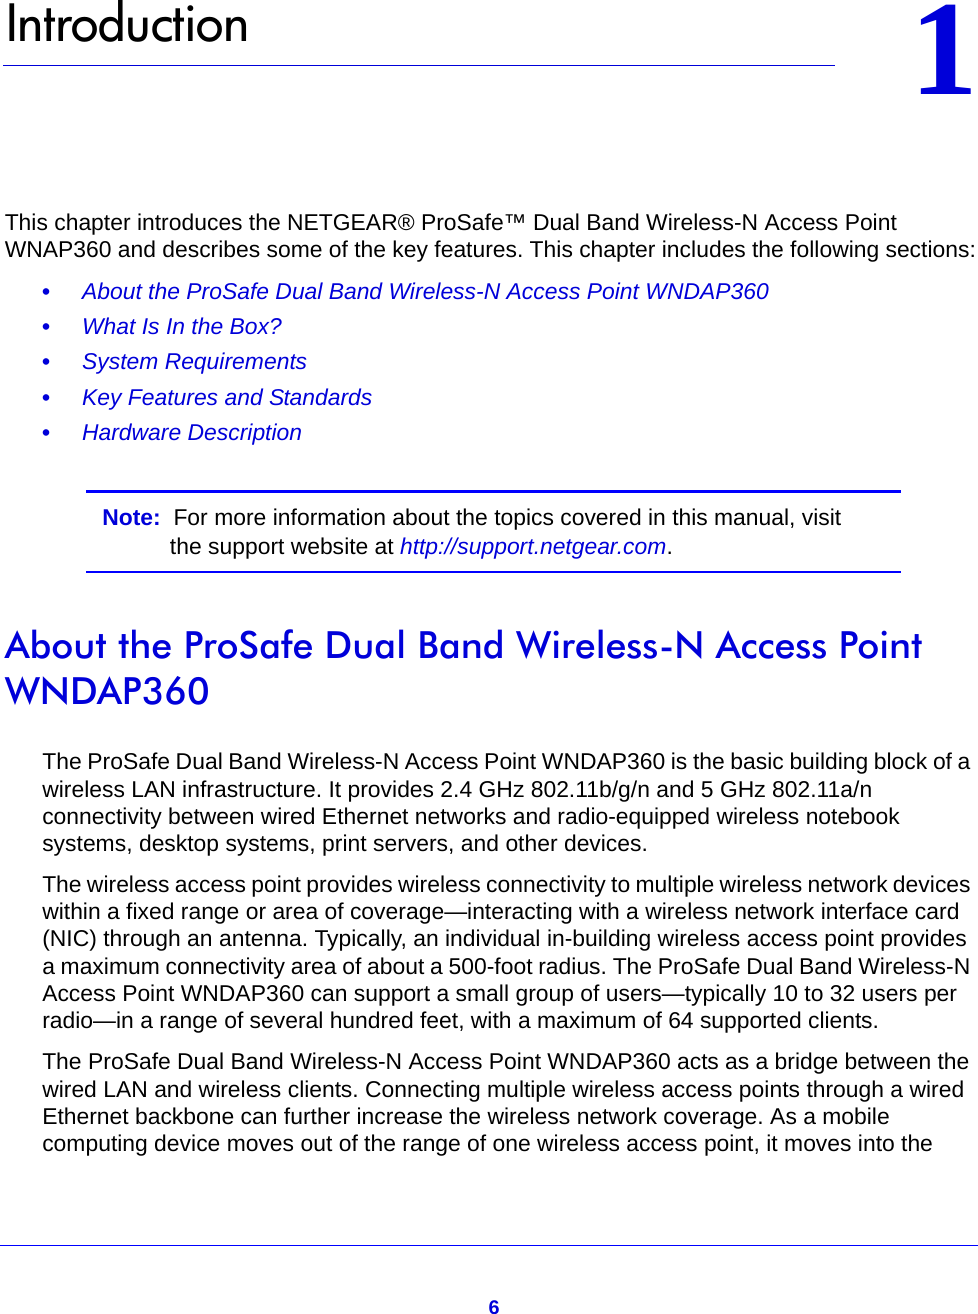 611.   IntroductionThis chapter introduces the NETGEAR® ProSafe™ Dual Band Wireless-N Access Point WNAP360 and describes some of the key features. This chapter includes the following sections:•     About the ProSafe Dual Band Wireless-N Access Point WNDAP360 •     What Is In the Box? •     System Requirements •     Key Features and Standards •     Hardware Description Note:  For more information about the topics covered in this manual, visit the support website at http://support.netgear.com.About the ProSafe Dual Band Wireless-N Access Point WNDAP360The ProSafe Dual Band Wireless-N Access Point WNDAP360 is the basic building block of a wireless LAN infrastructure. It provides 2.4 GHz 802.11b/g/n and 5 GHz 802.11a/n connectivity between wired Ethernet networks and radio-equipped wireless notebook systems, desktop systems, print servers, and other devices.The wireless access point provides wireless connectivity to multiple wireless network devices within a fixed range or area of coverage—interacting with a wireless network interface card (NIC) through an antenna. Typically, an individual in-building wireless access point provides a maximum connectivity area of about a 500-foot radius. The ProSafe Dual Band Wireless-N Access Point WNDAP360 can support a small group of users—typically 10 to 32 users per radio—in a range of several hundred feet, with a maximum of 64 supported clients.The ProSafe Dual Band Wireless-N Access Point WNDAP360 acts as a bridge between the wired LAN and wireless clients. Connecting multiple wireless access points through a wired Ethernet backbone can further increase the wireless network coverage. As a mobile computing device moves out of the range of one wireless access point, it moves into the 